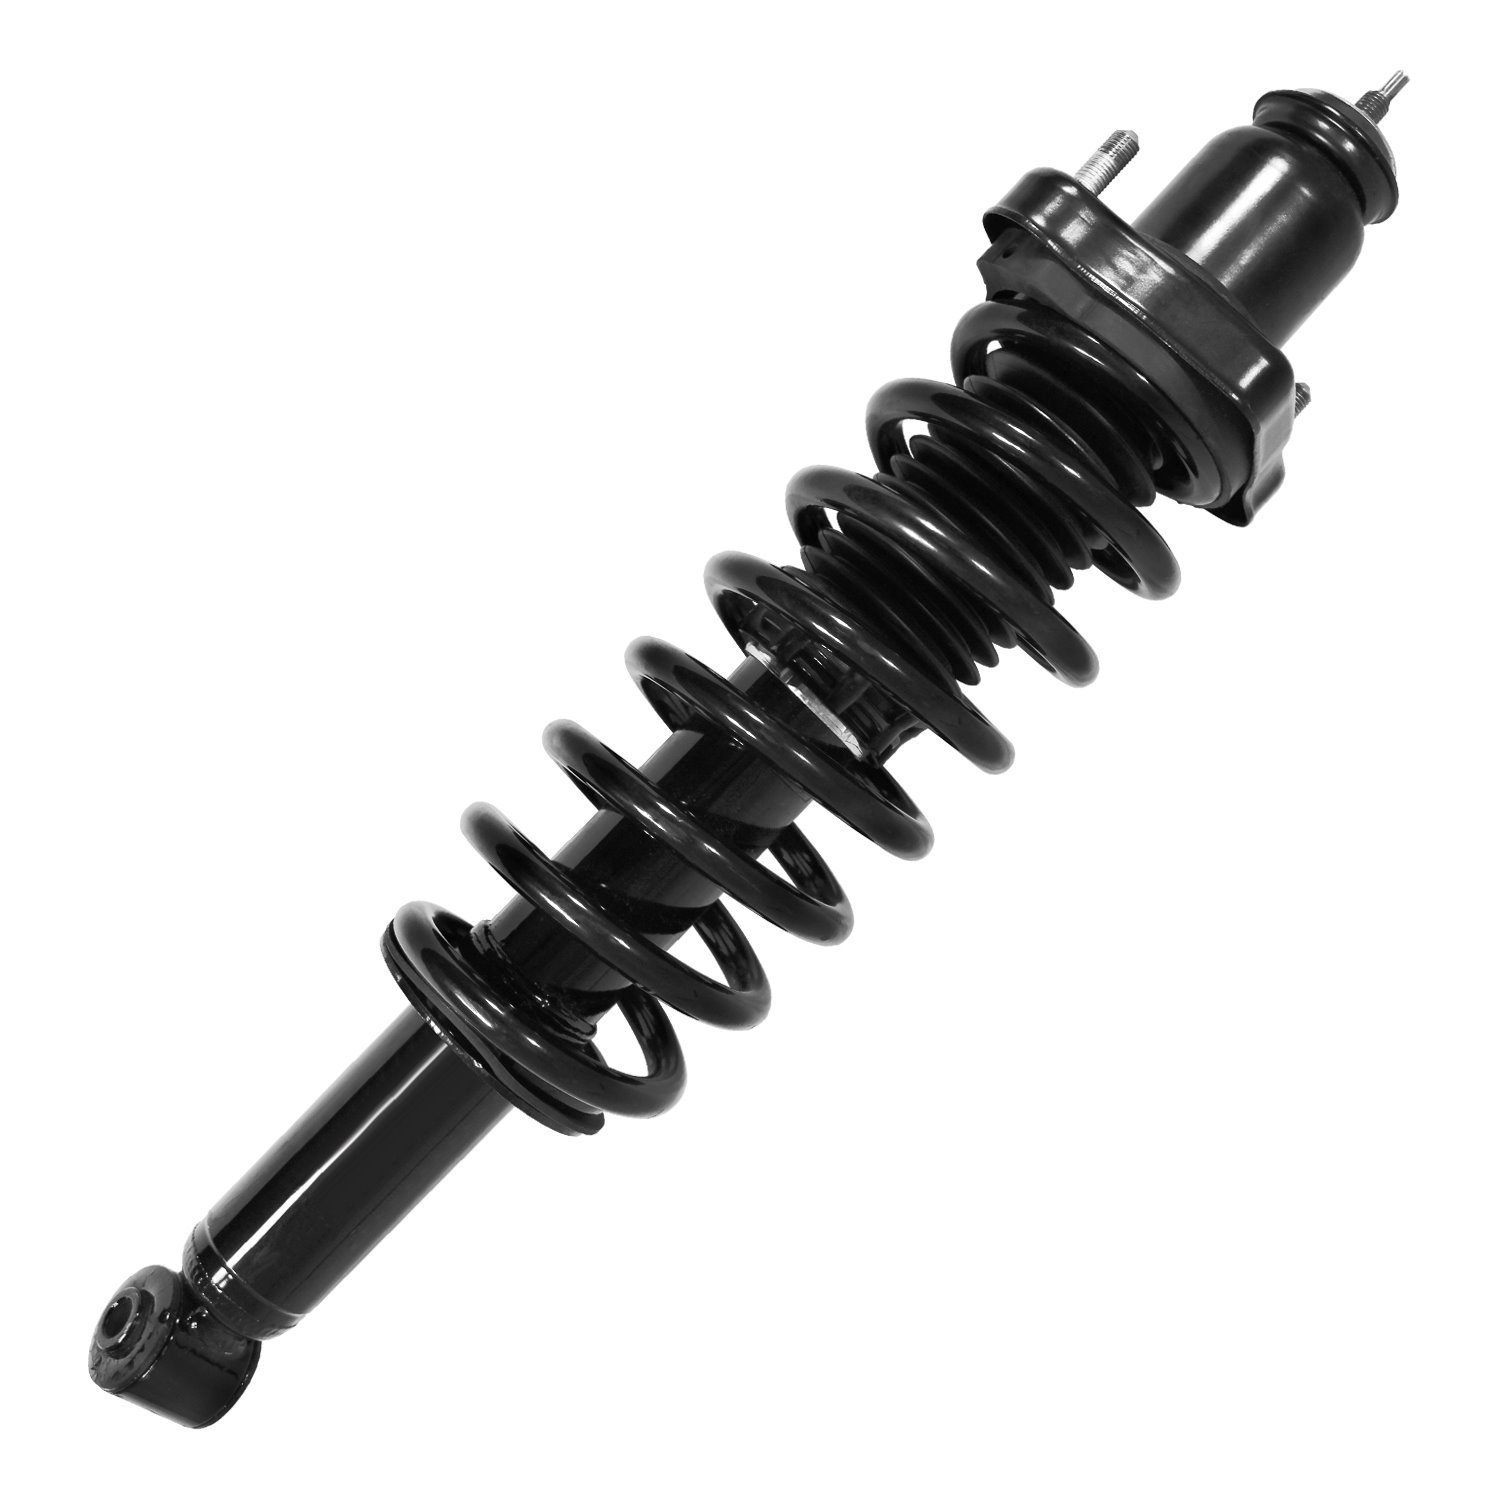 15580 Suspension Strut & Coil Spring Assembly Fits Select Dodge Caliber, Jeep Compass, Jeep Patriot